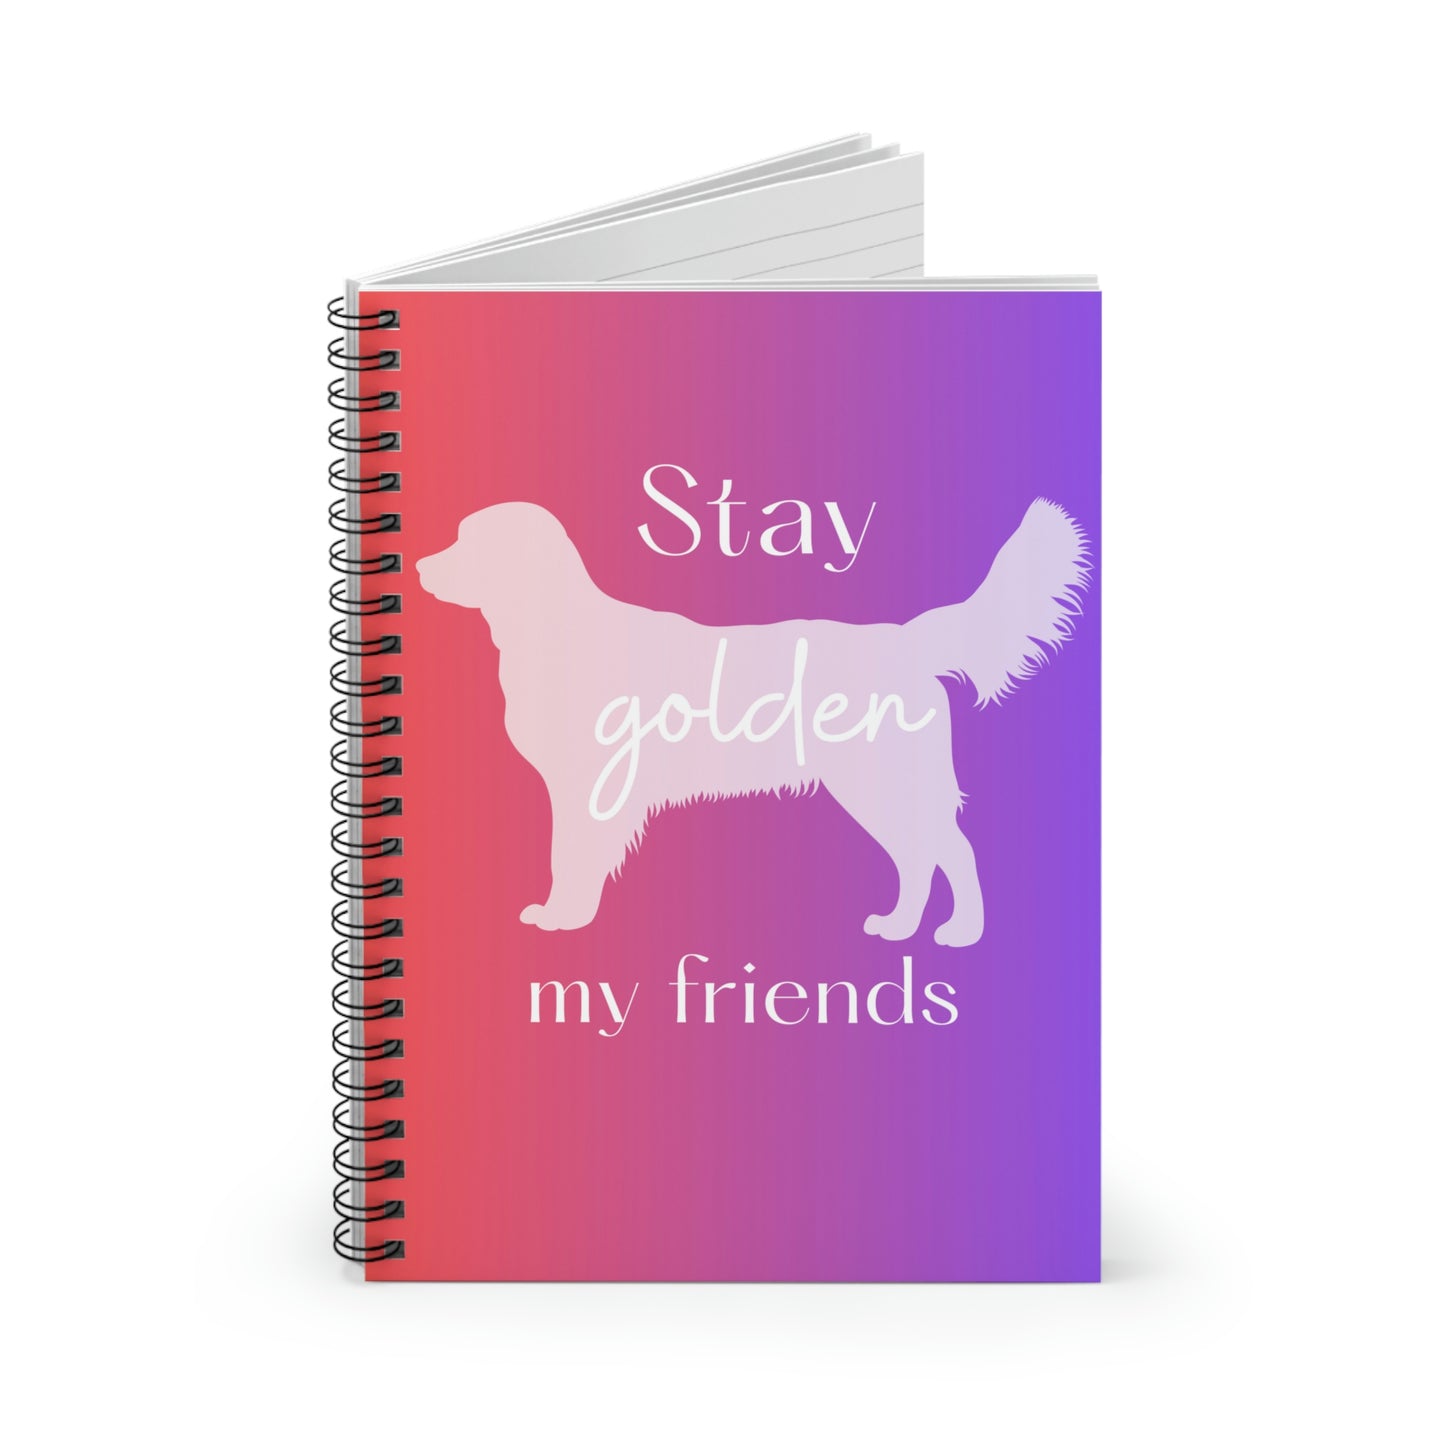 Stay Golden My Friends Spiral Notebook (Red/Blue Ombre) - Ruled Line